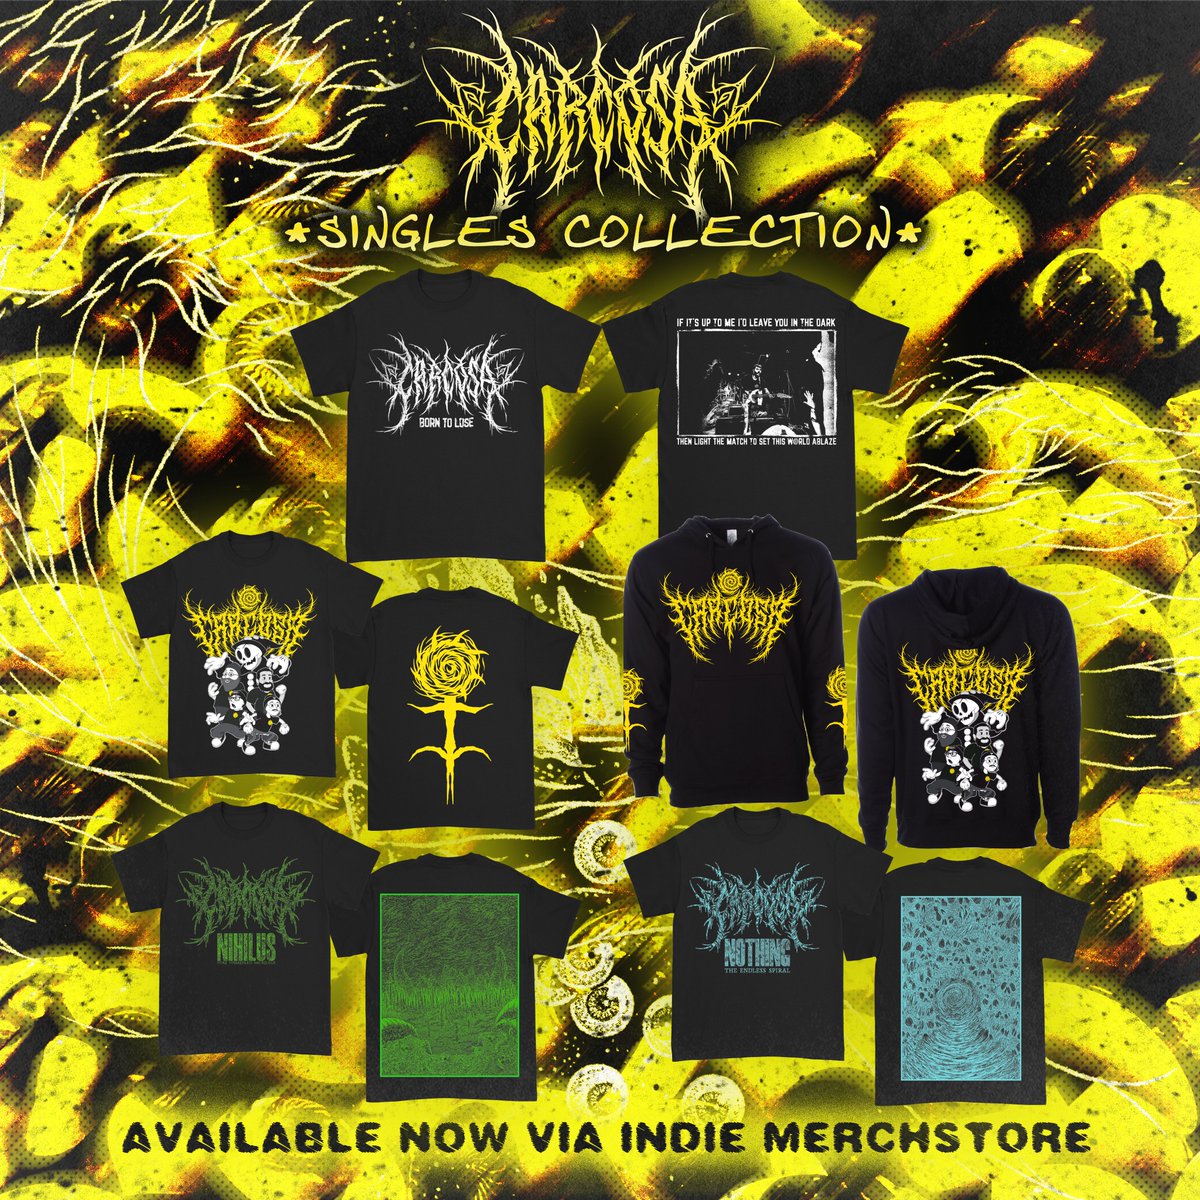 new 'Singles Collection' drop in collaboration with @IndieMerchstore is here! Check out⛓️ carcosa.indiemerch.com ⛓️